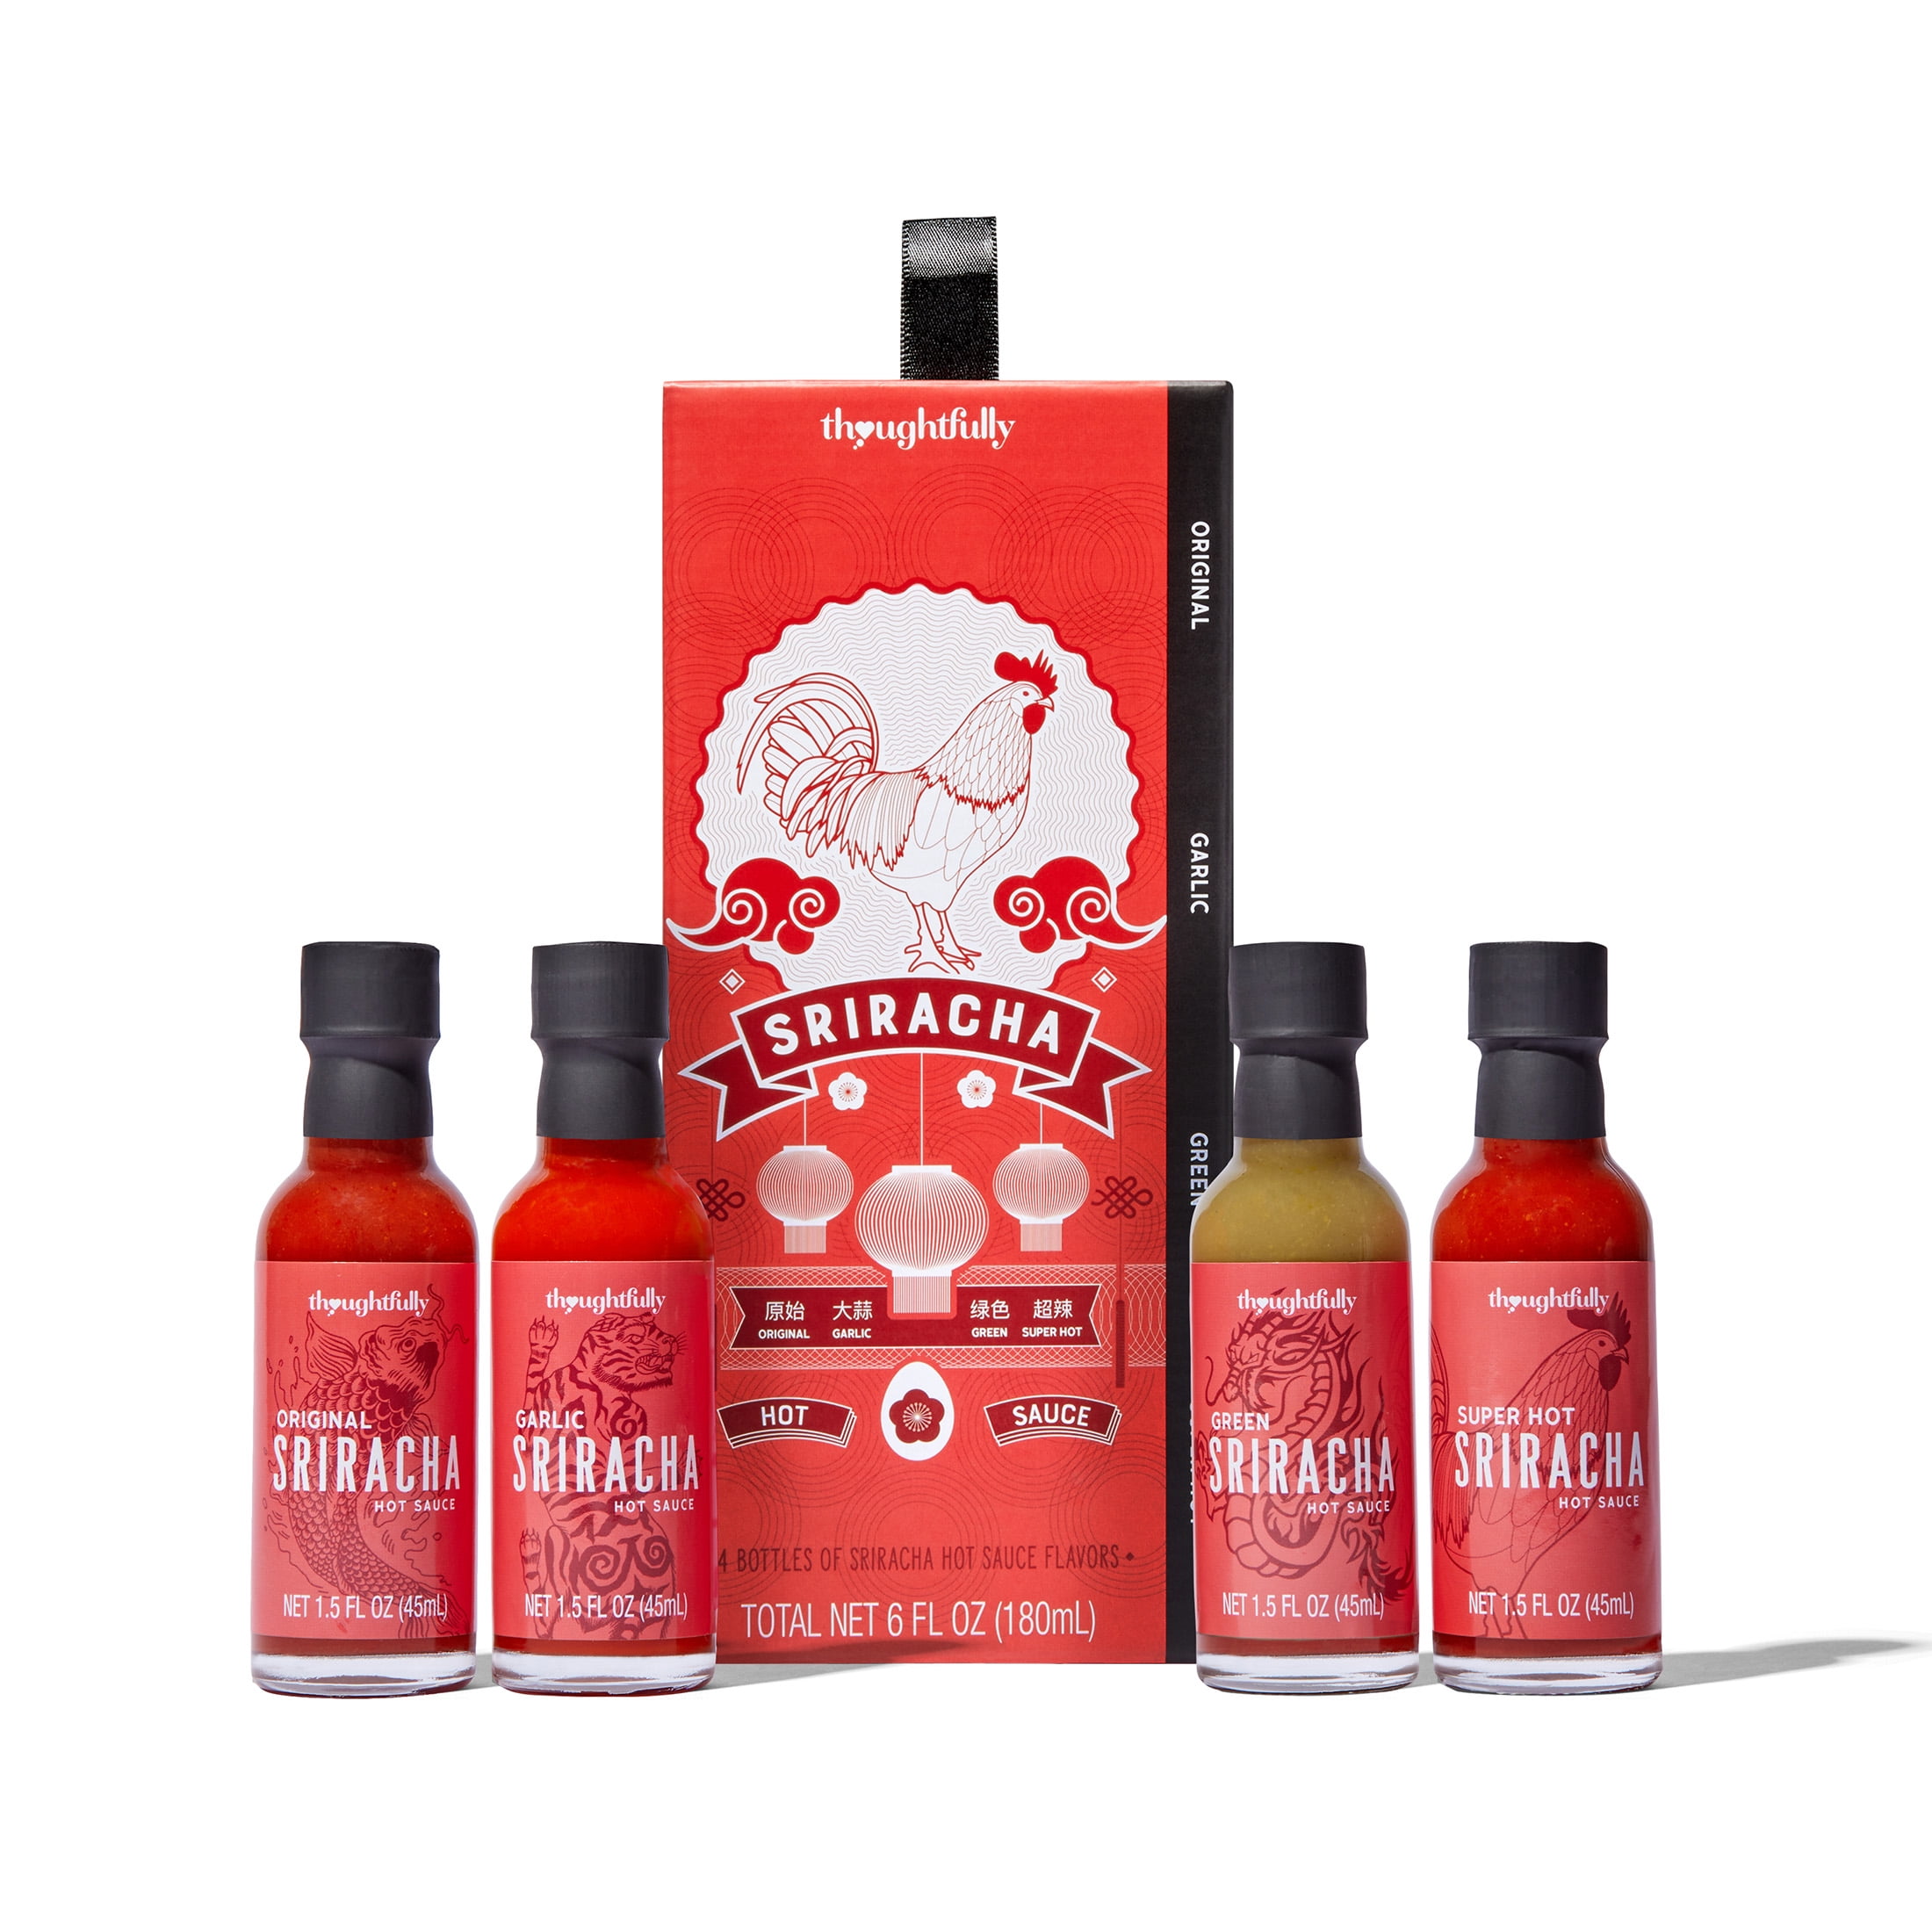 Bushwick Kitchen Spicy Sampler Gift Box, Set Includes our Gochujang  Sriracha, Spicy Maple Syrup, and Spicy Honey Hot Sauces, 5 Recipes, Chile  Pepper